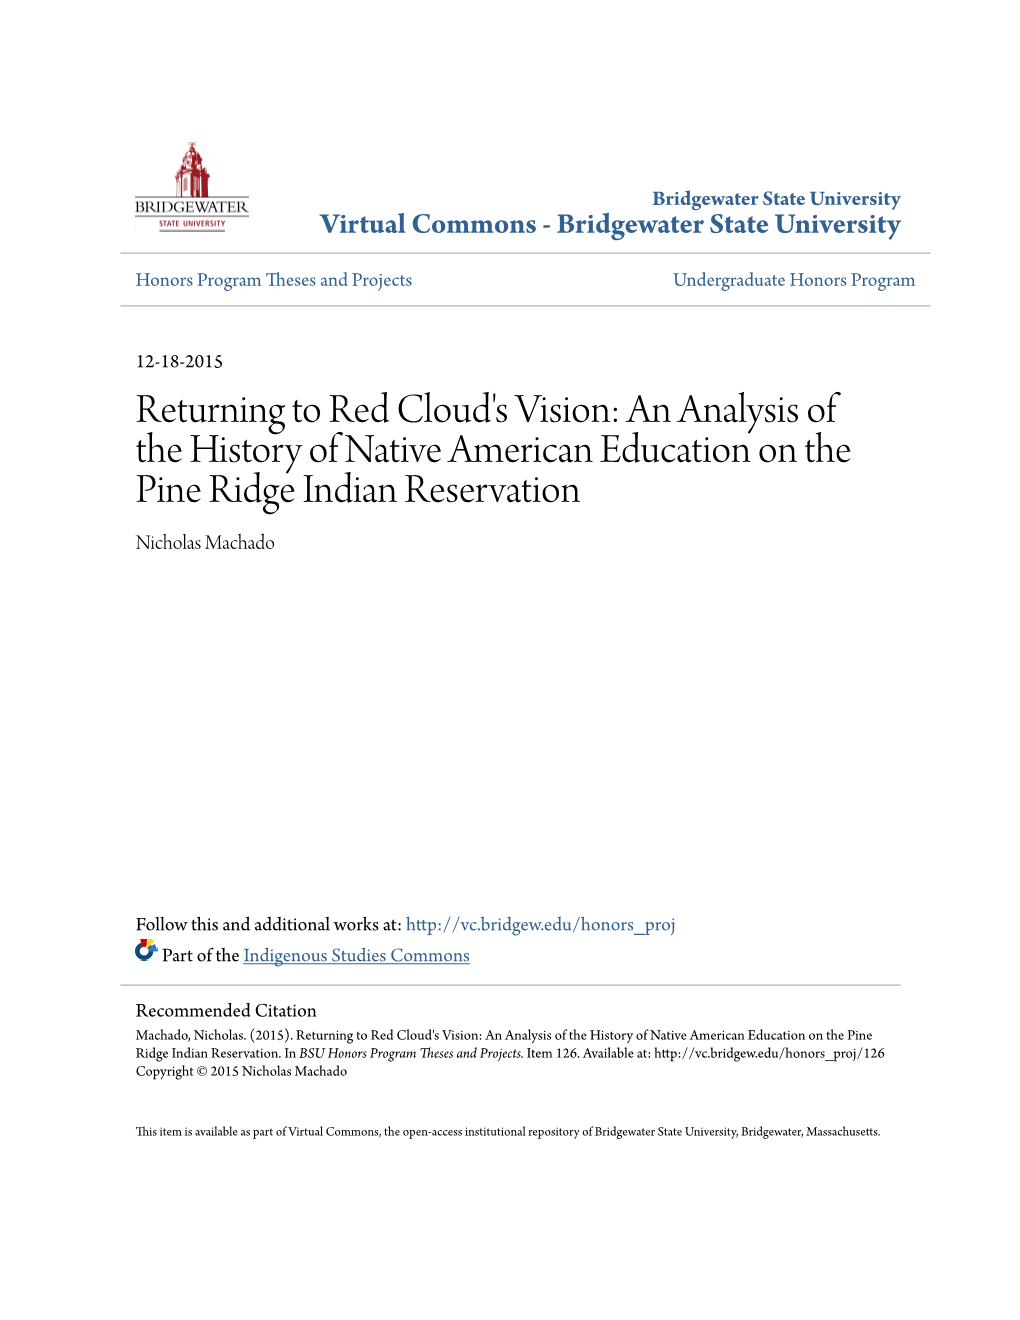 Returning to Red Cloud's Vision: an Analysis of the History of Native American Education on the Pine Ridge Indian Reservation Nicholas Machado